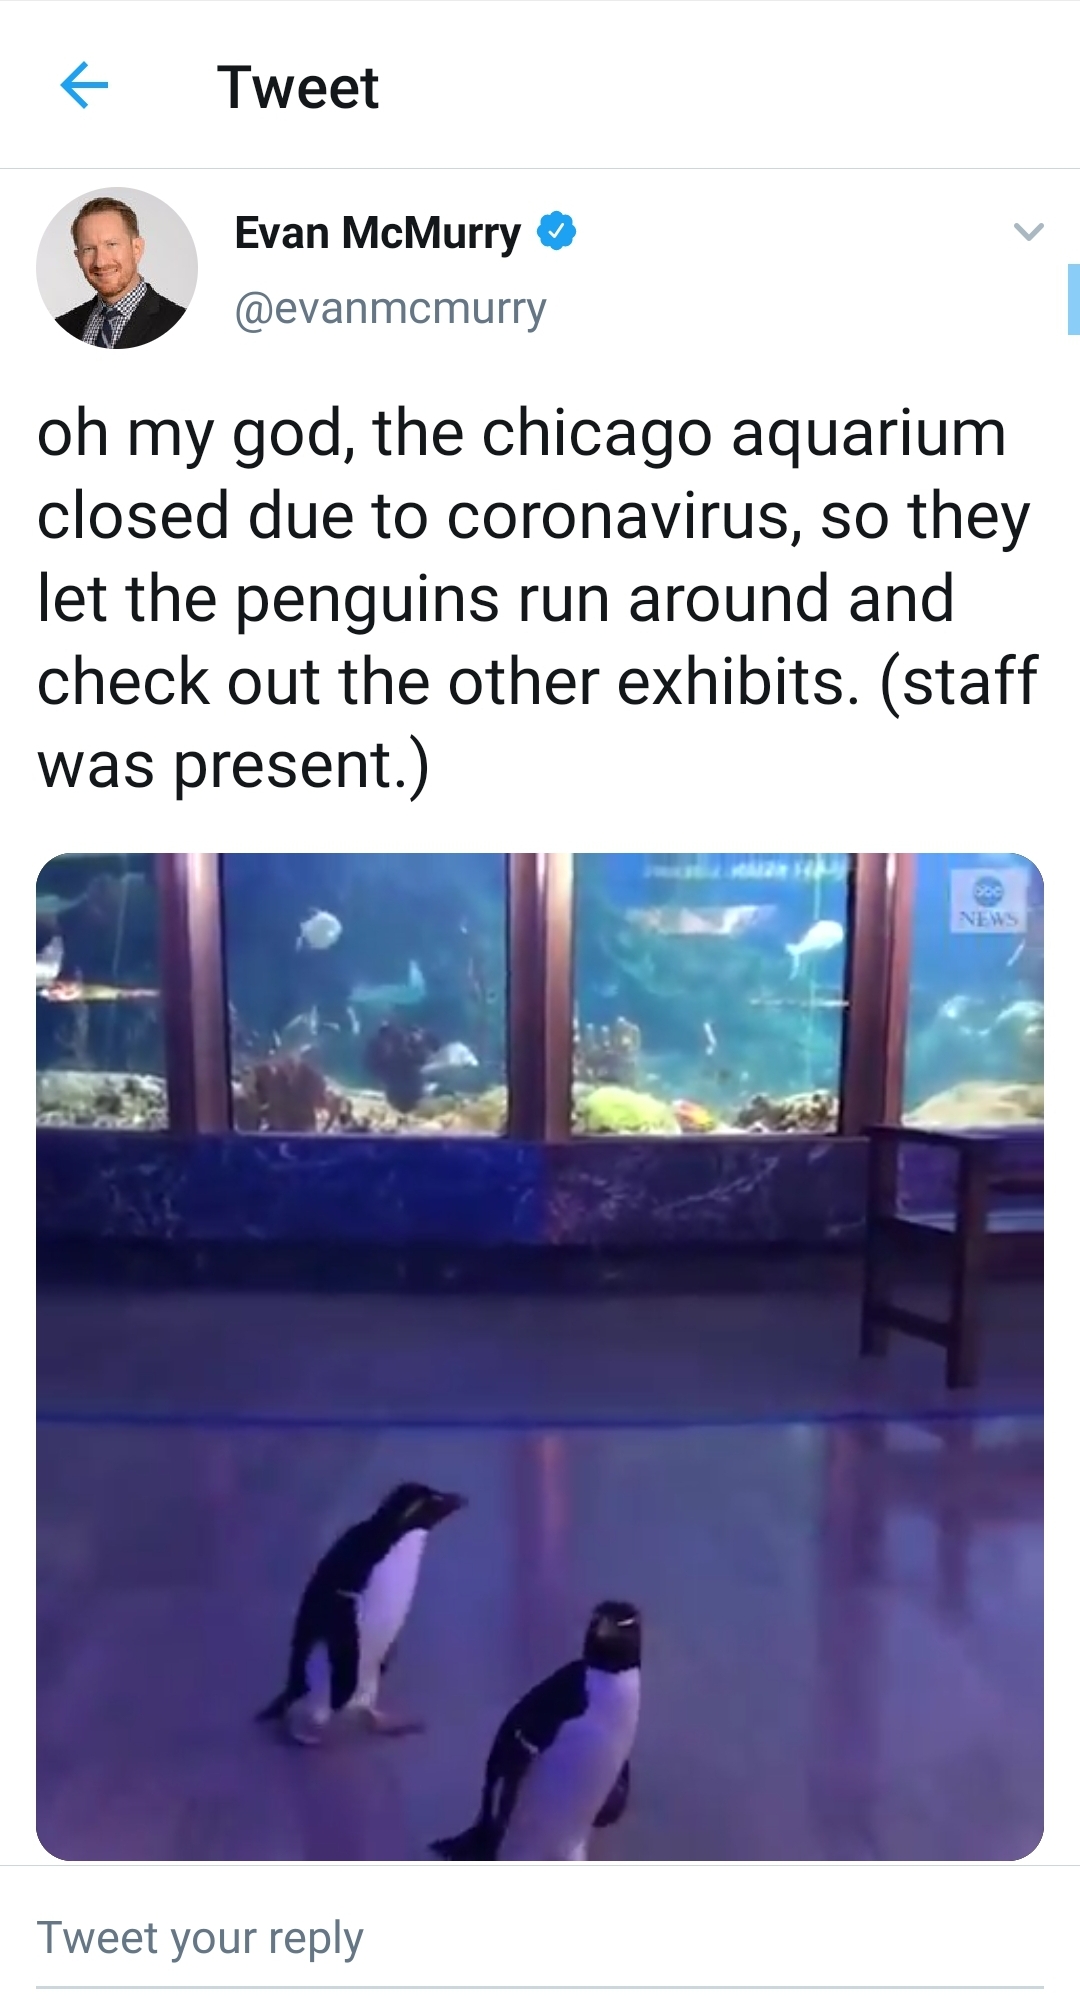 water - Tweet Evan McMurry oh my god, the chicago aquarium closed due to coronavirus, so they let the penguins run around and check out the other exhibits. staff was present. Tweet your